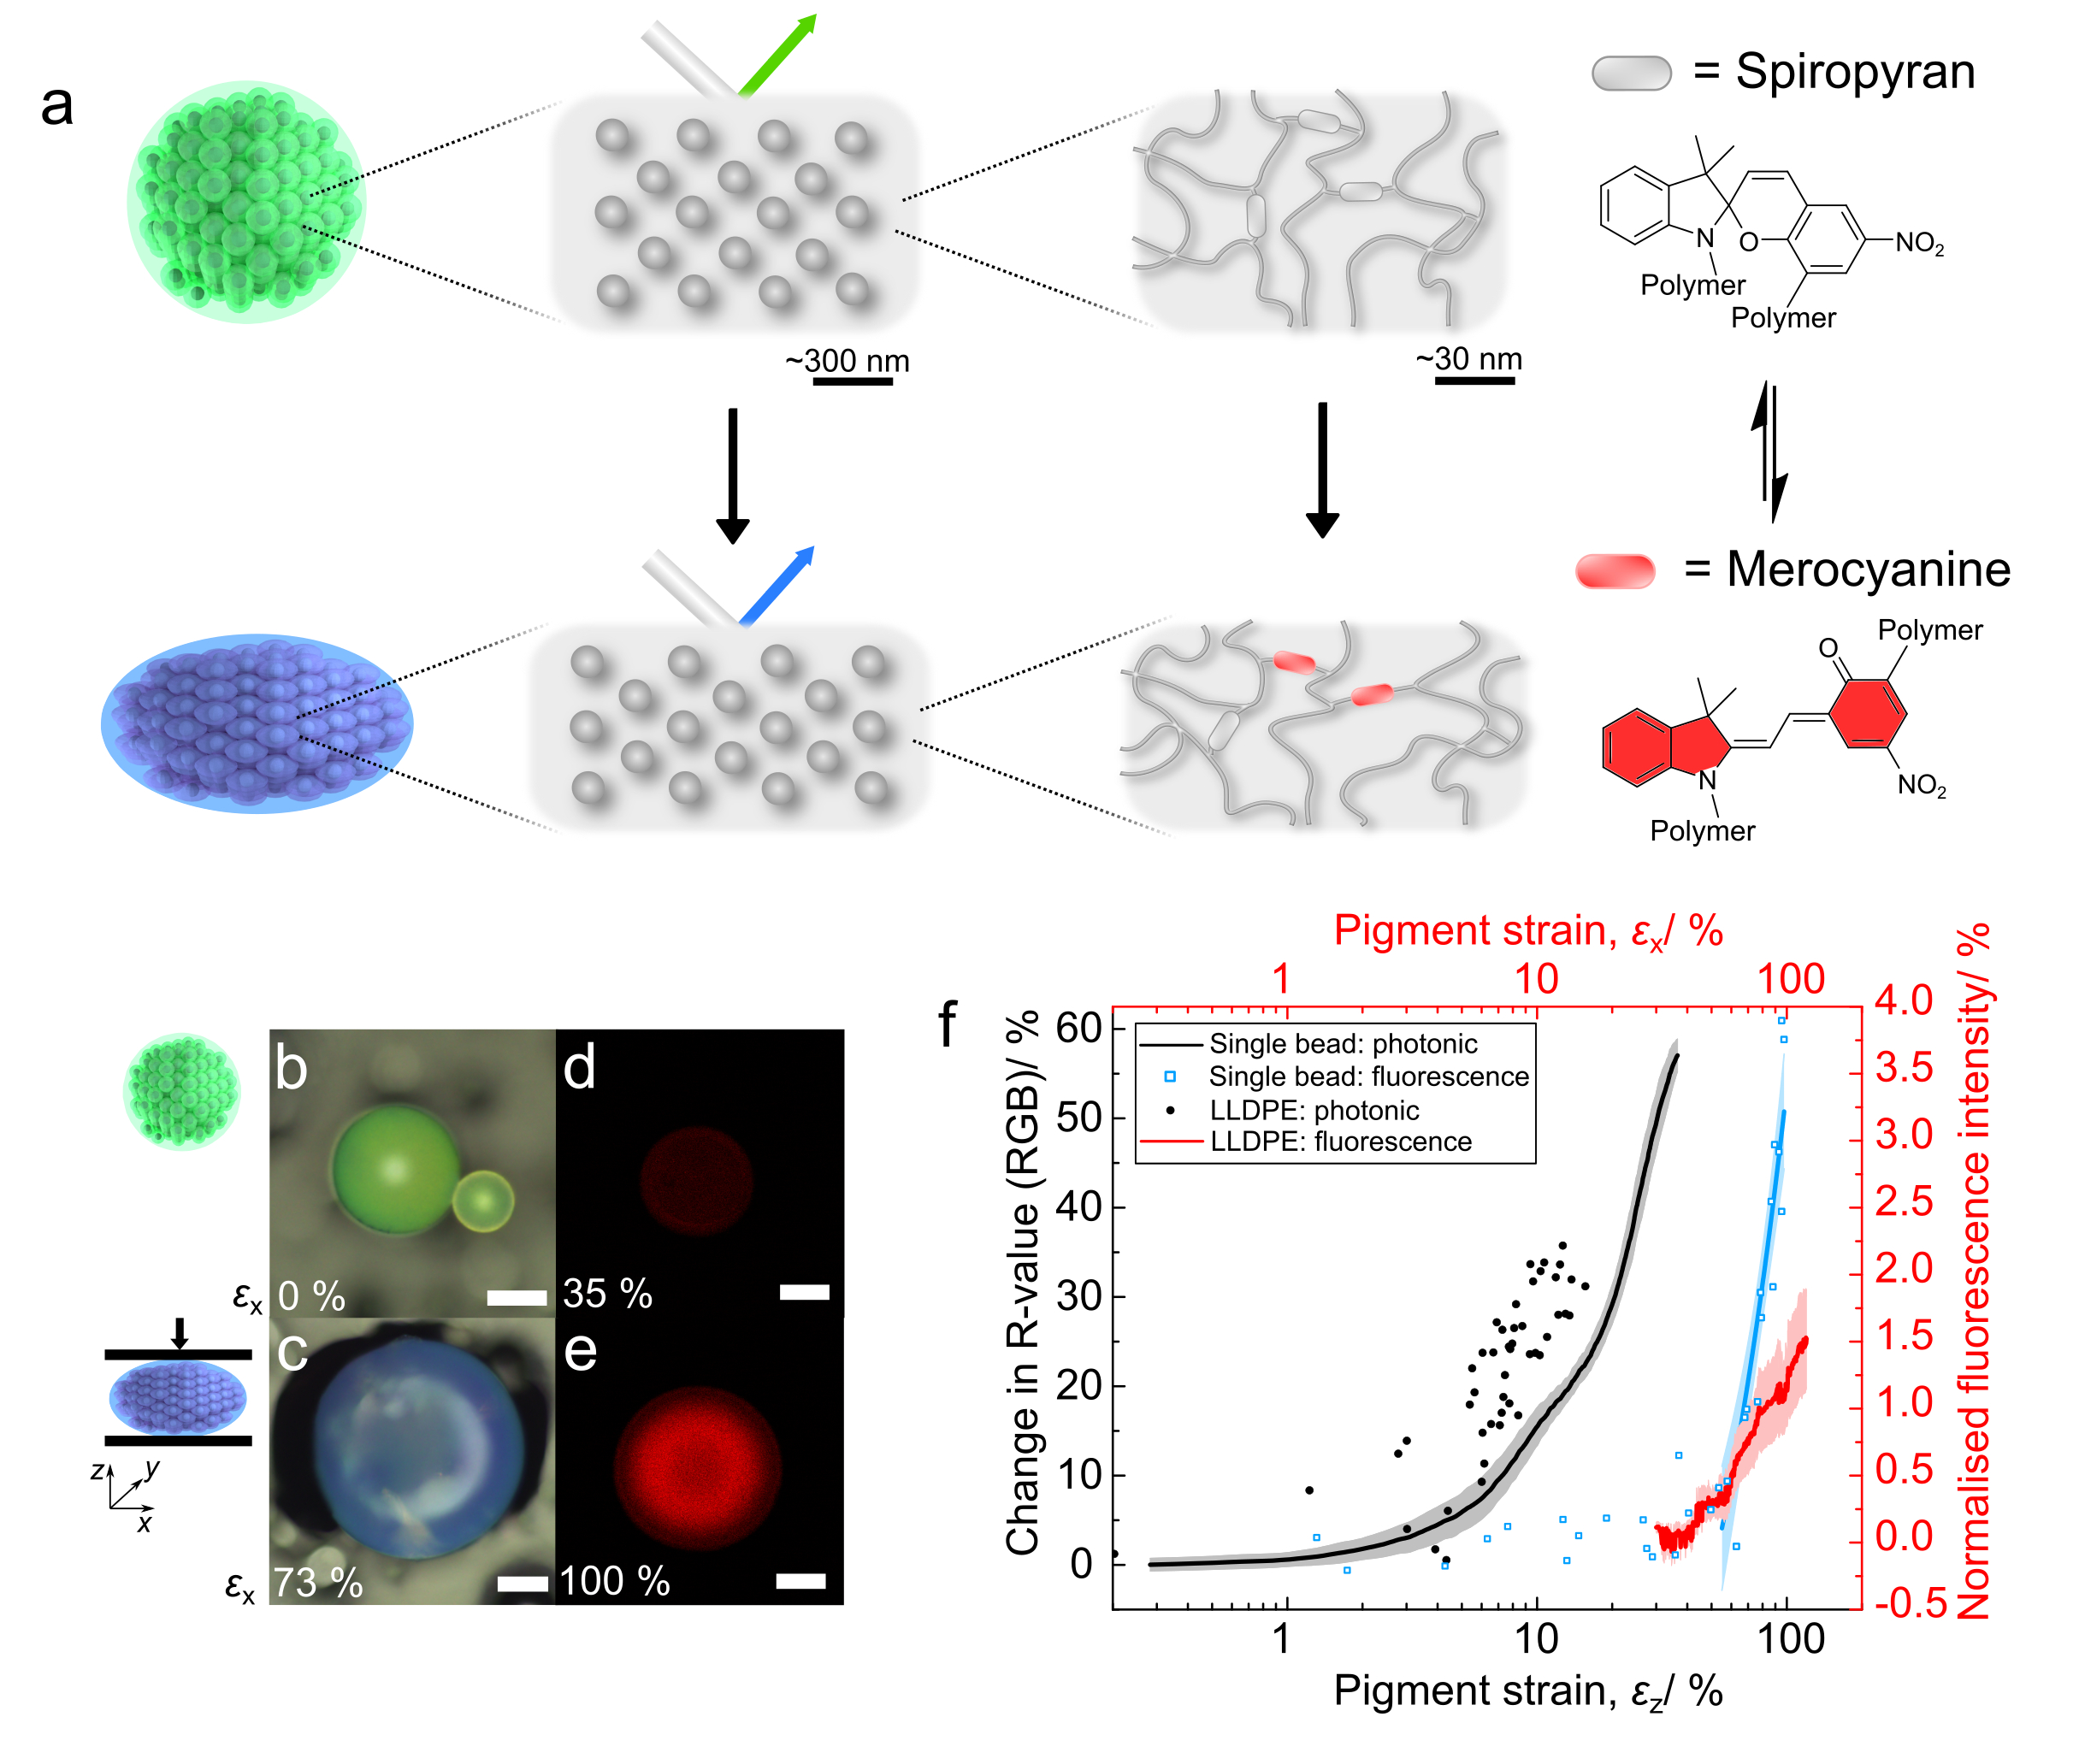 Different forms of silica nanoparticles based on (A) Structural